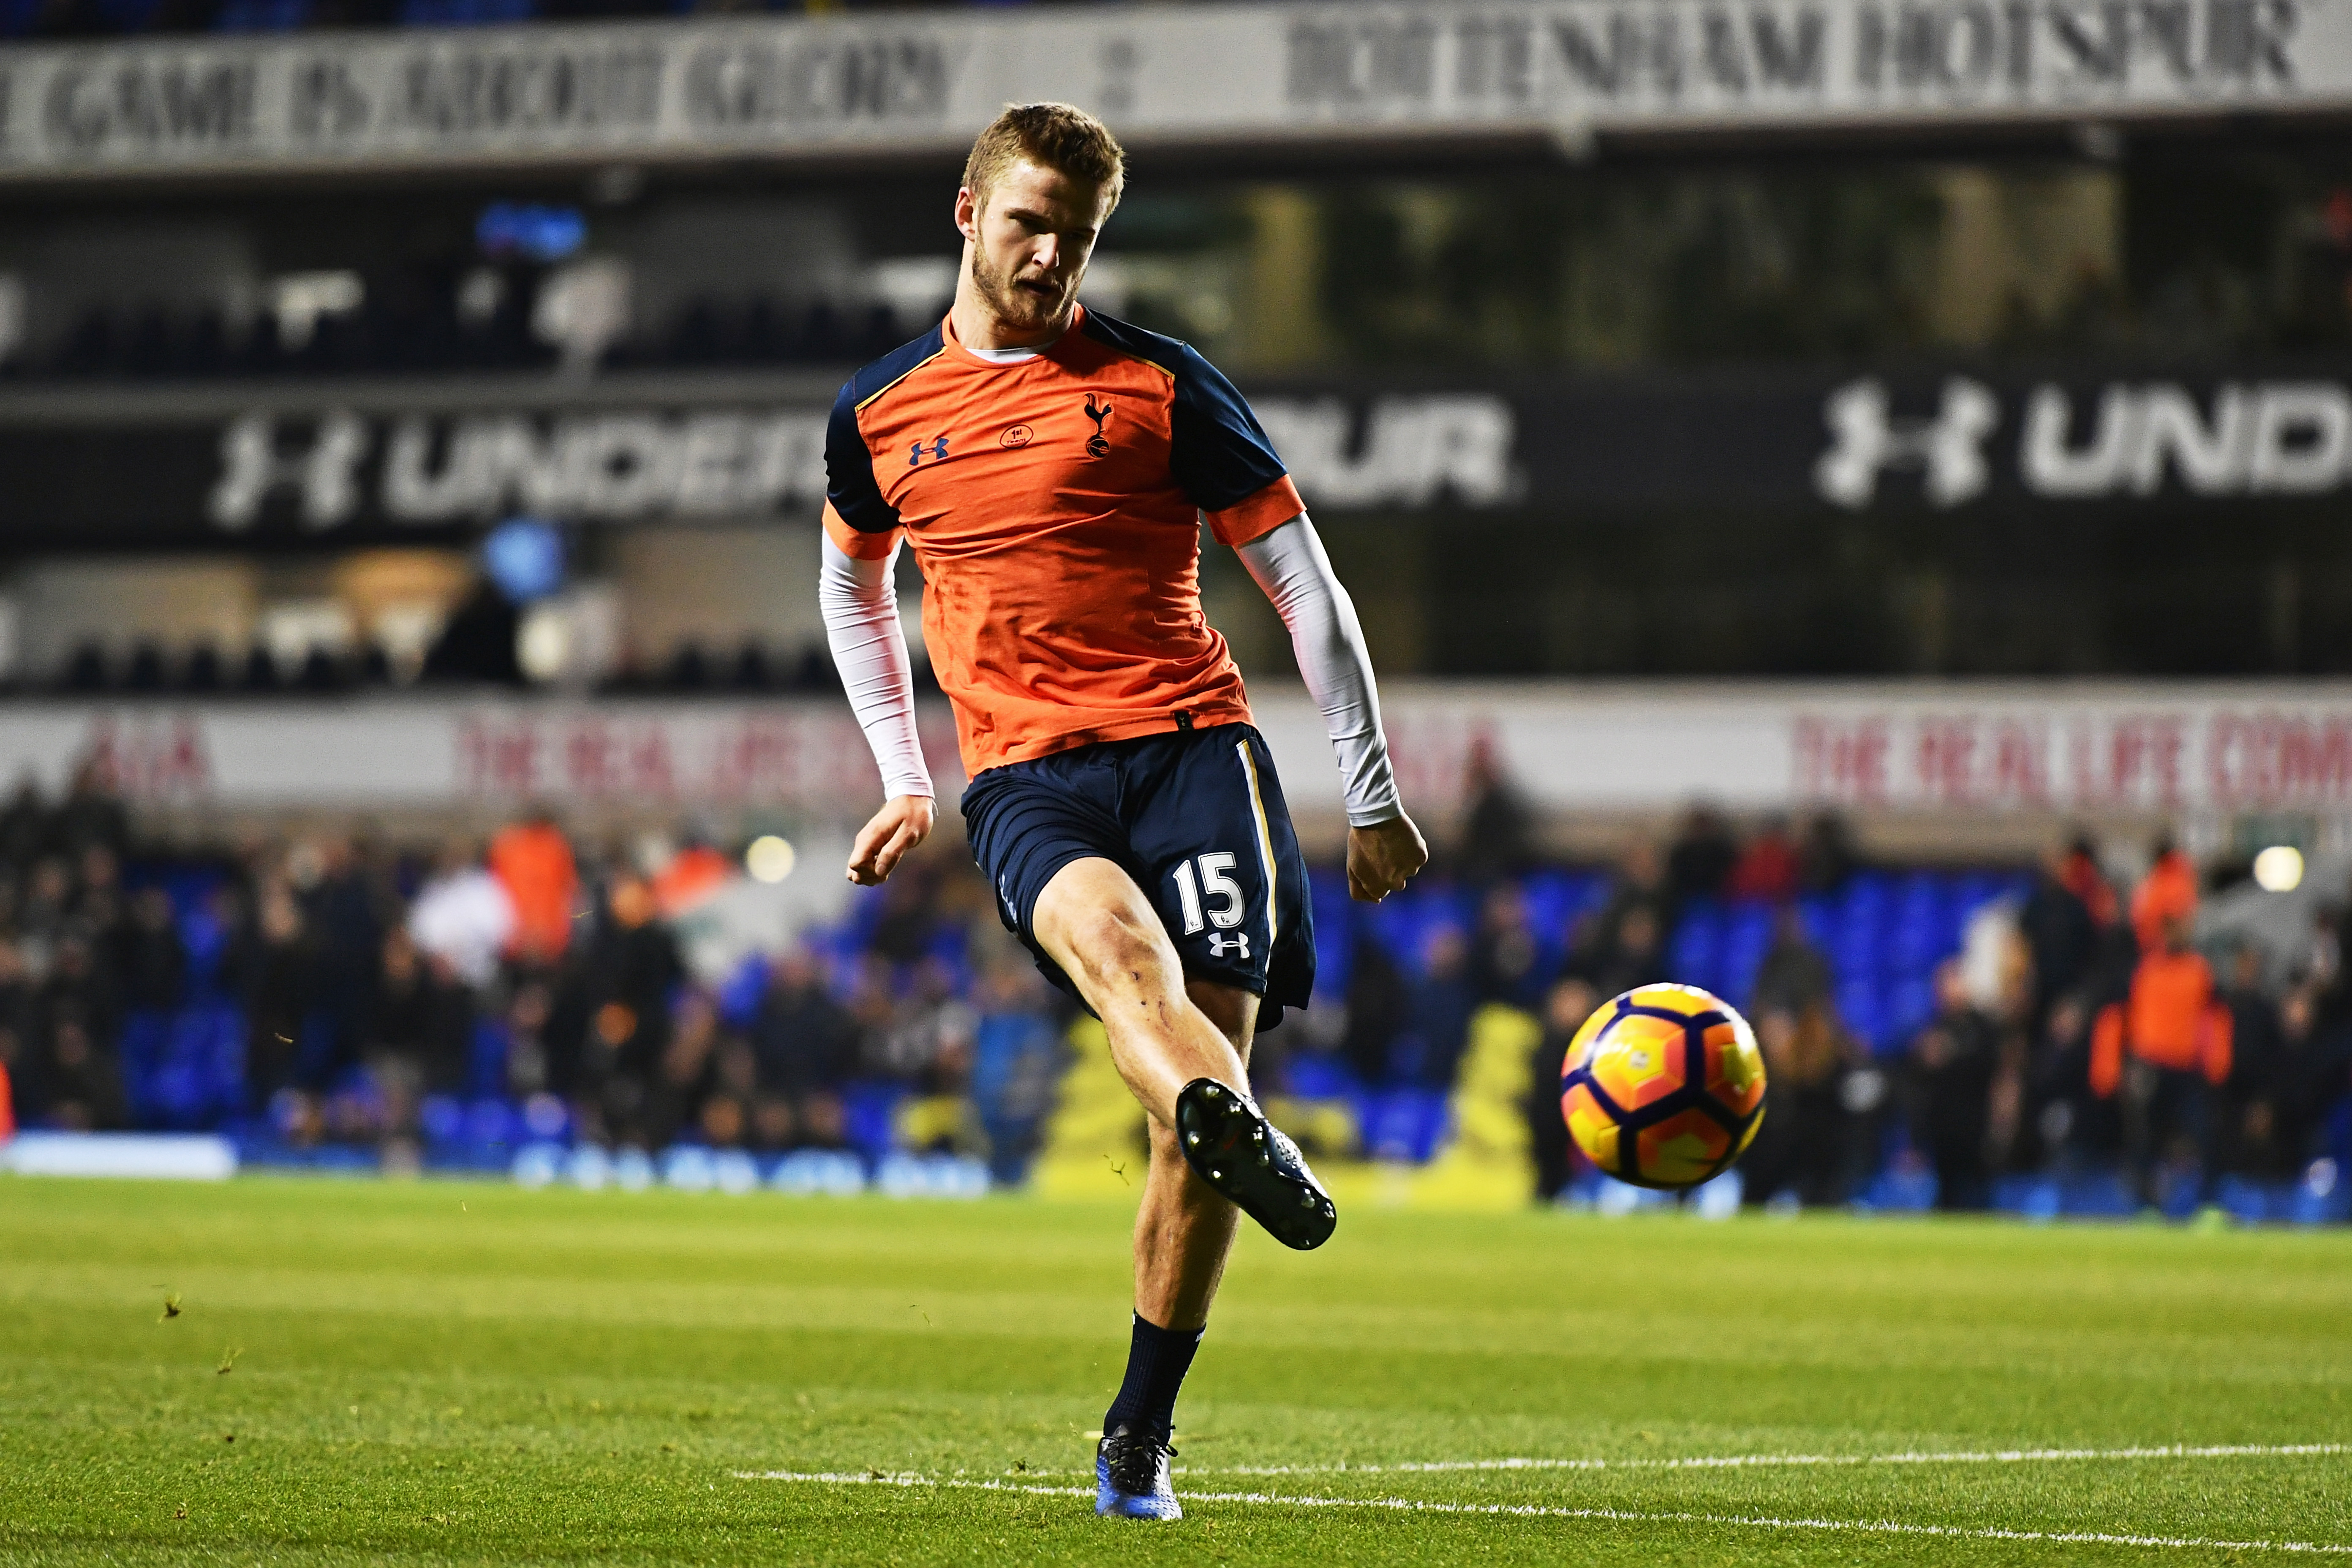 LONDON, ENGLAND - DECEMBER 14: Eric Dier of Tottenham Hotspur shoots during the warm up prior to kick off during the Premier League match between Tottenham Hotspur and Hull City at White Hart Lane on December 14, 2016 in London, England.  (Photo by Dan Mullan/Getty Images)